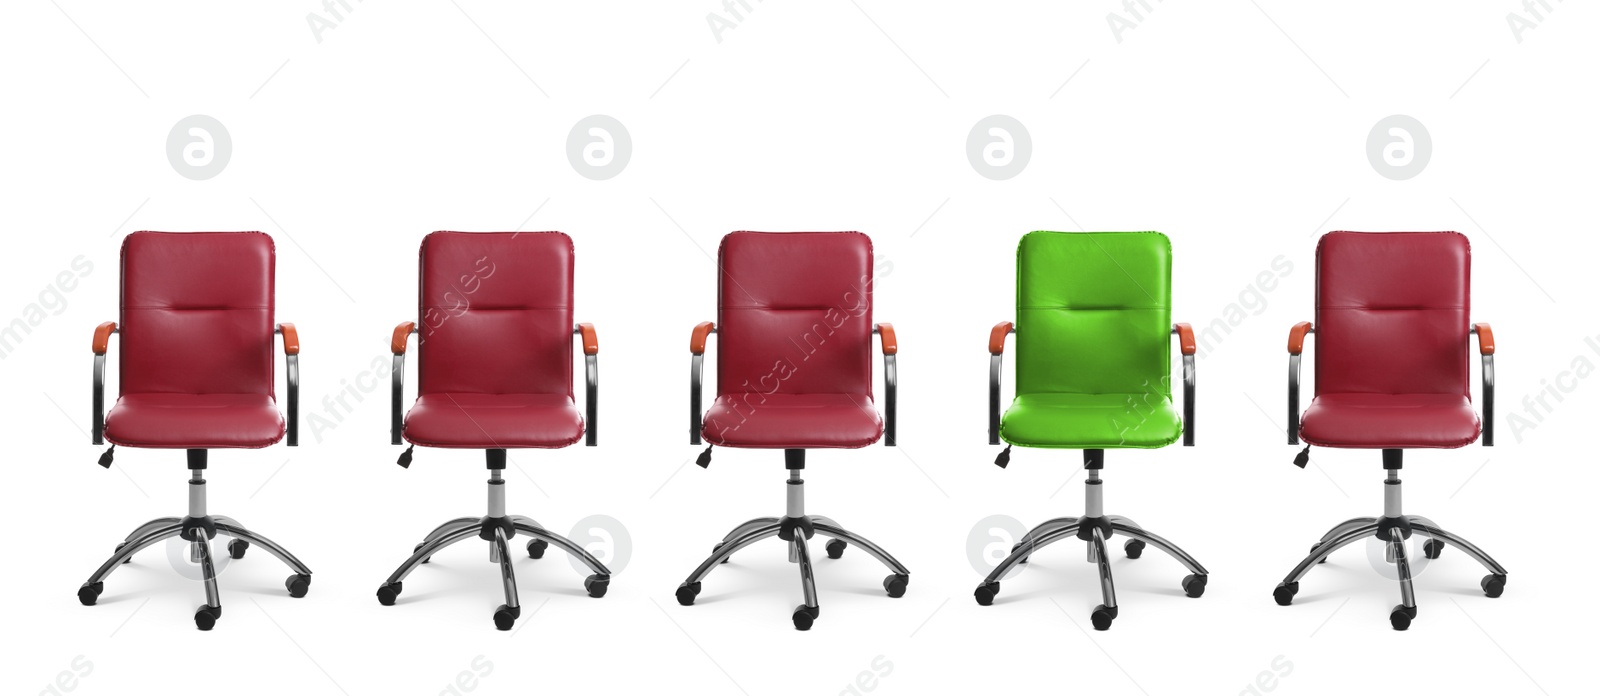 Image of Vacant position. Green office chair among red ones on white background, banner design